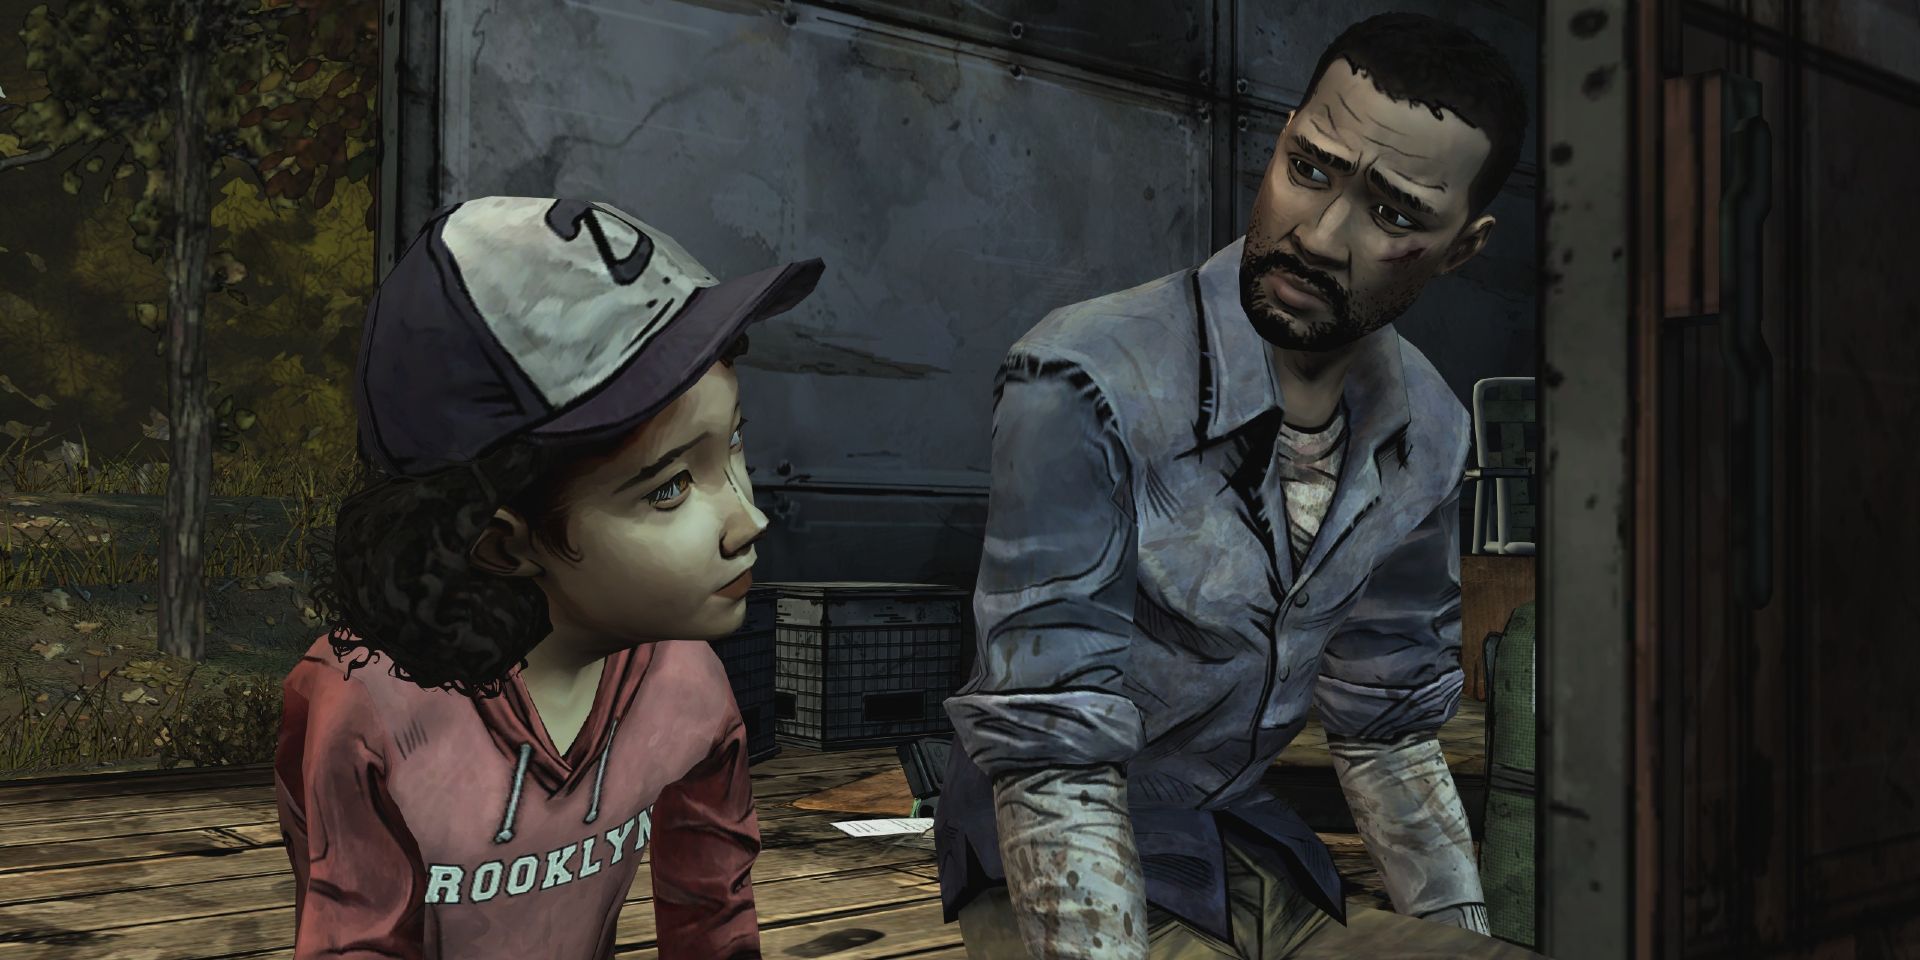 Clementine and Lee having a difficult conversation on a train in The Walking Dead.